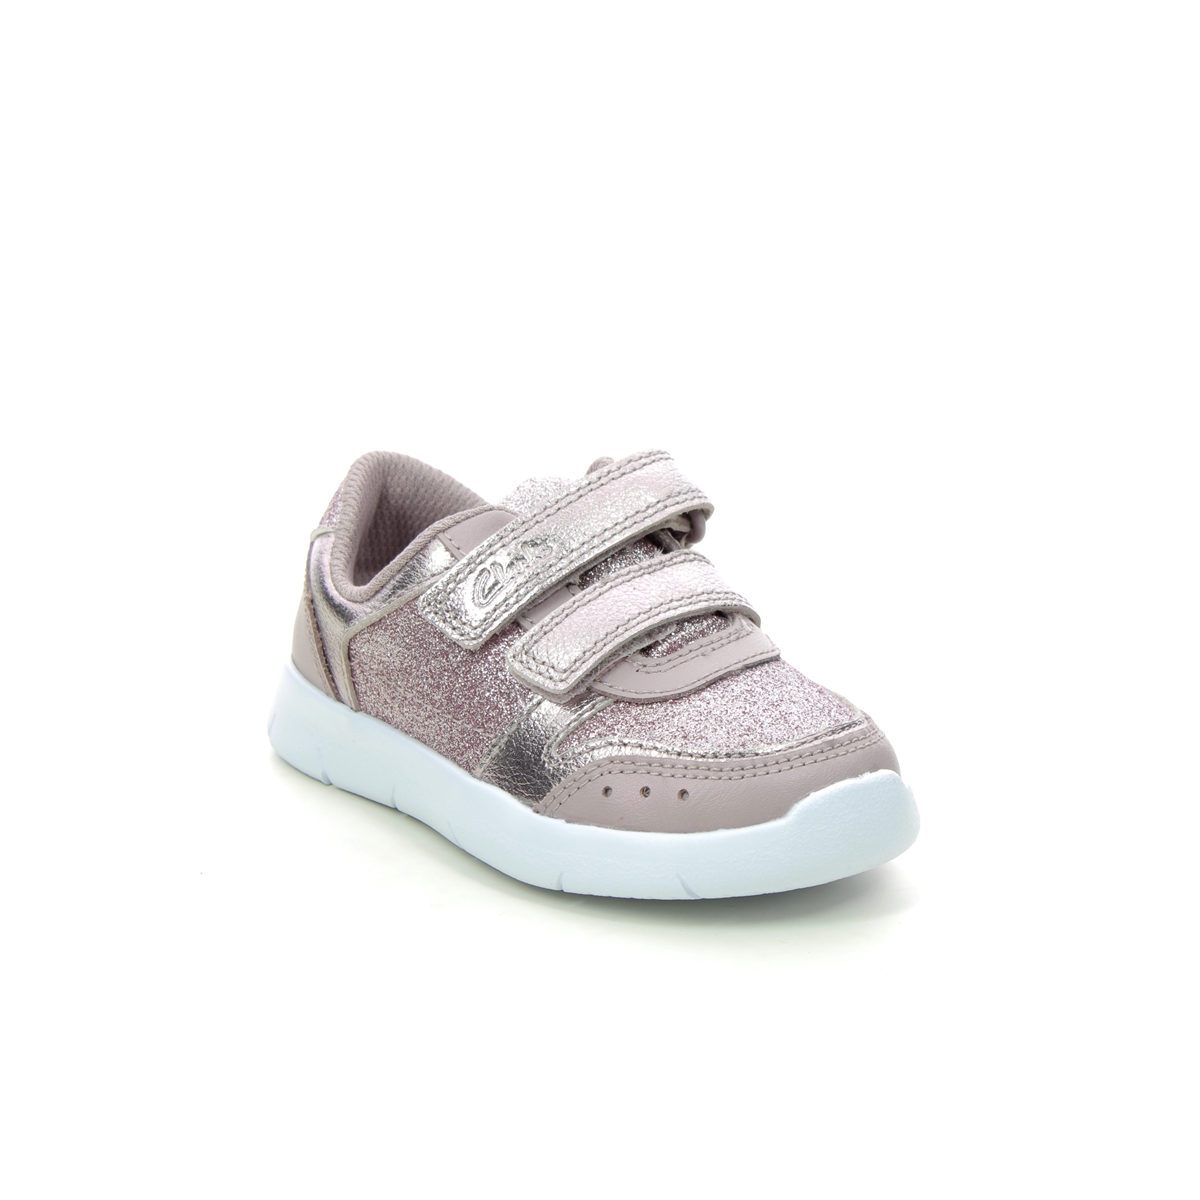 Clarks Ath Sonar T Pink Kids Toddler Girls Trainers 683727G In Size 5 In Plain Pink G Width Fitting For kids